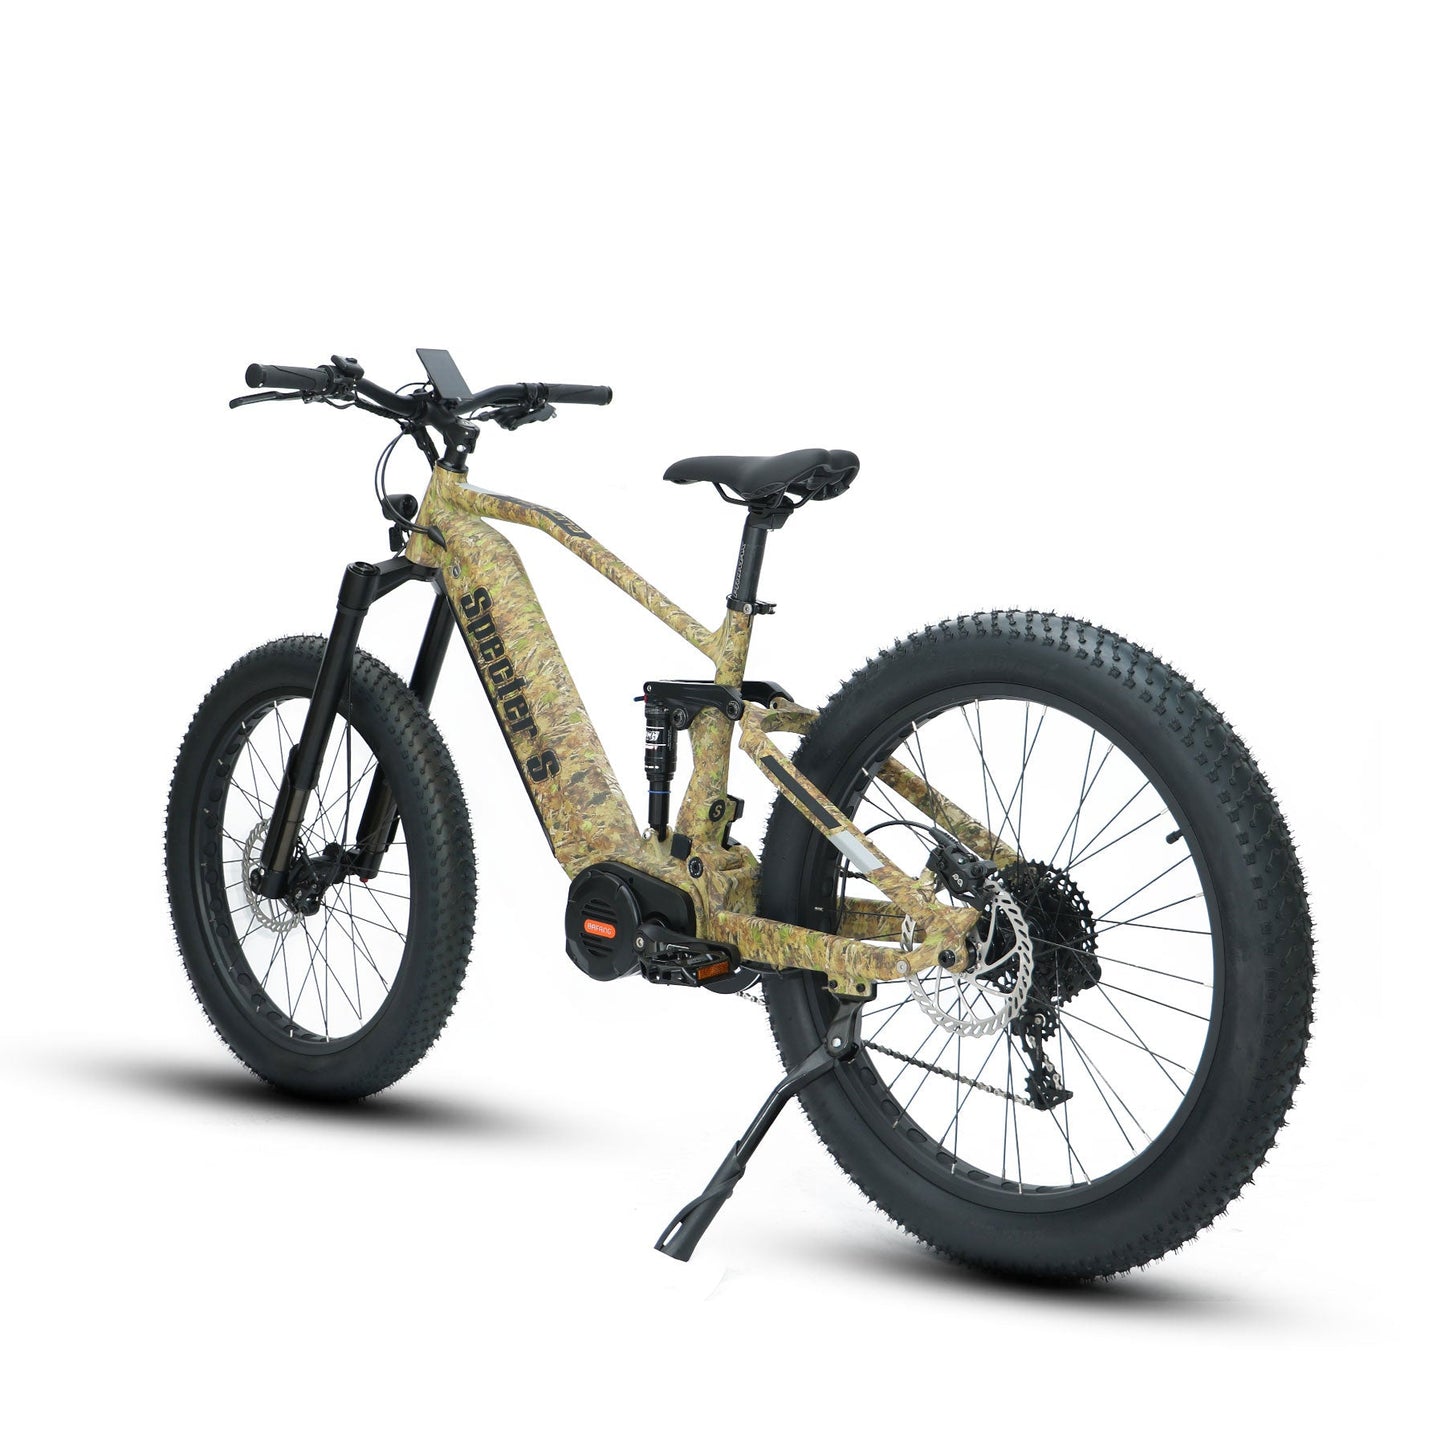 EUNORAU Specter-S E-Bike with Bafang G510(M620) Motor DNM Suspension Looking for an eBike that can take on any trail with maximum comfort and control? Look no further than the EUNORAU SPECTER-S 2023 Electric Bike, the ultimate eBike for rough and varied conditions.  The core of the Specter’s power is the Bafang G510(M620) motor, which is the flagship of Bafang’s lineup. With its mid-drive, 1000w, torque sensor, and 160 N.m torque, this motor has great balance, power, utility, and feels intuitive. 